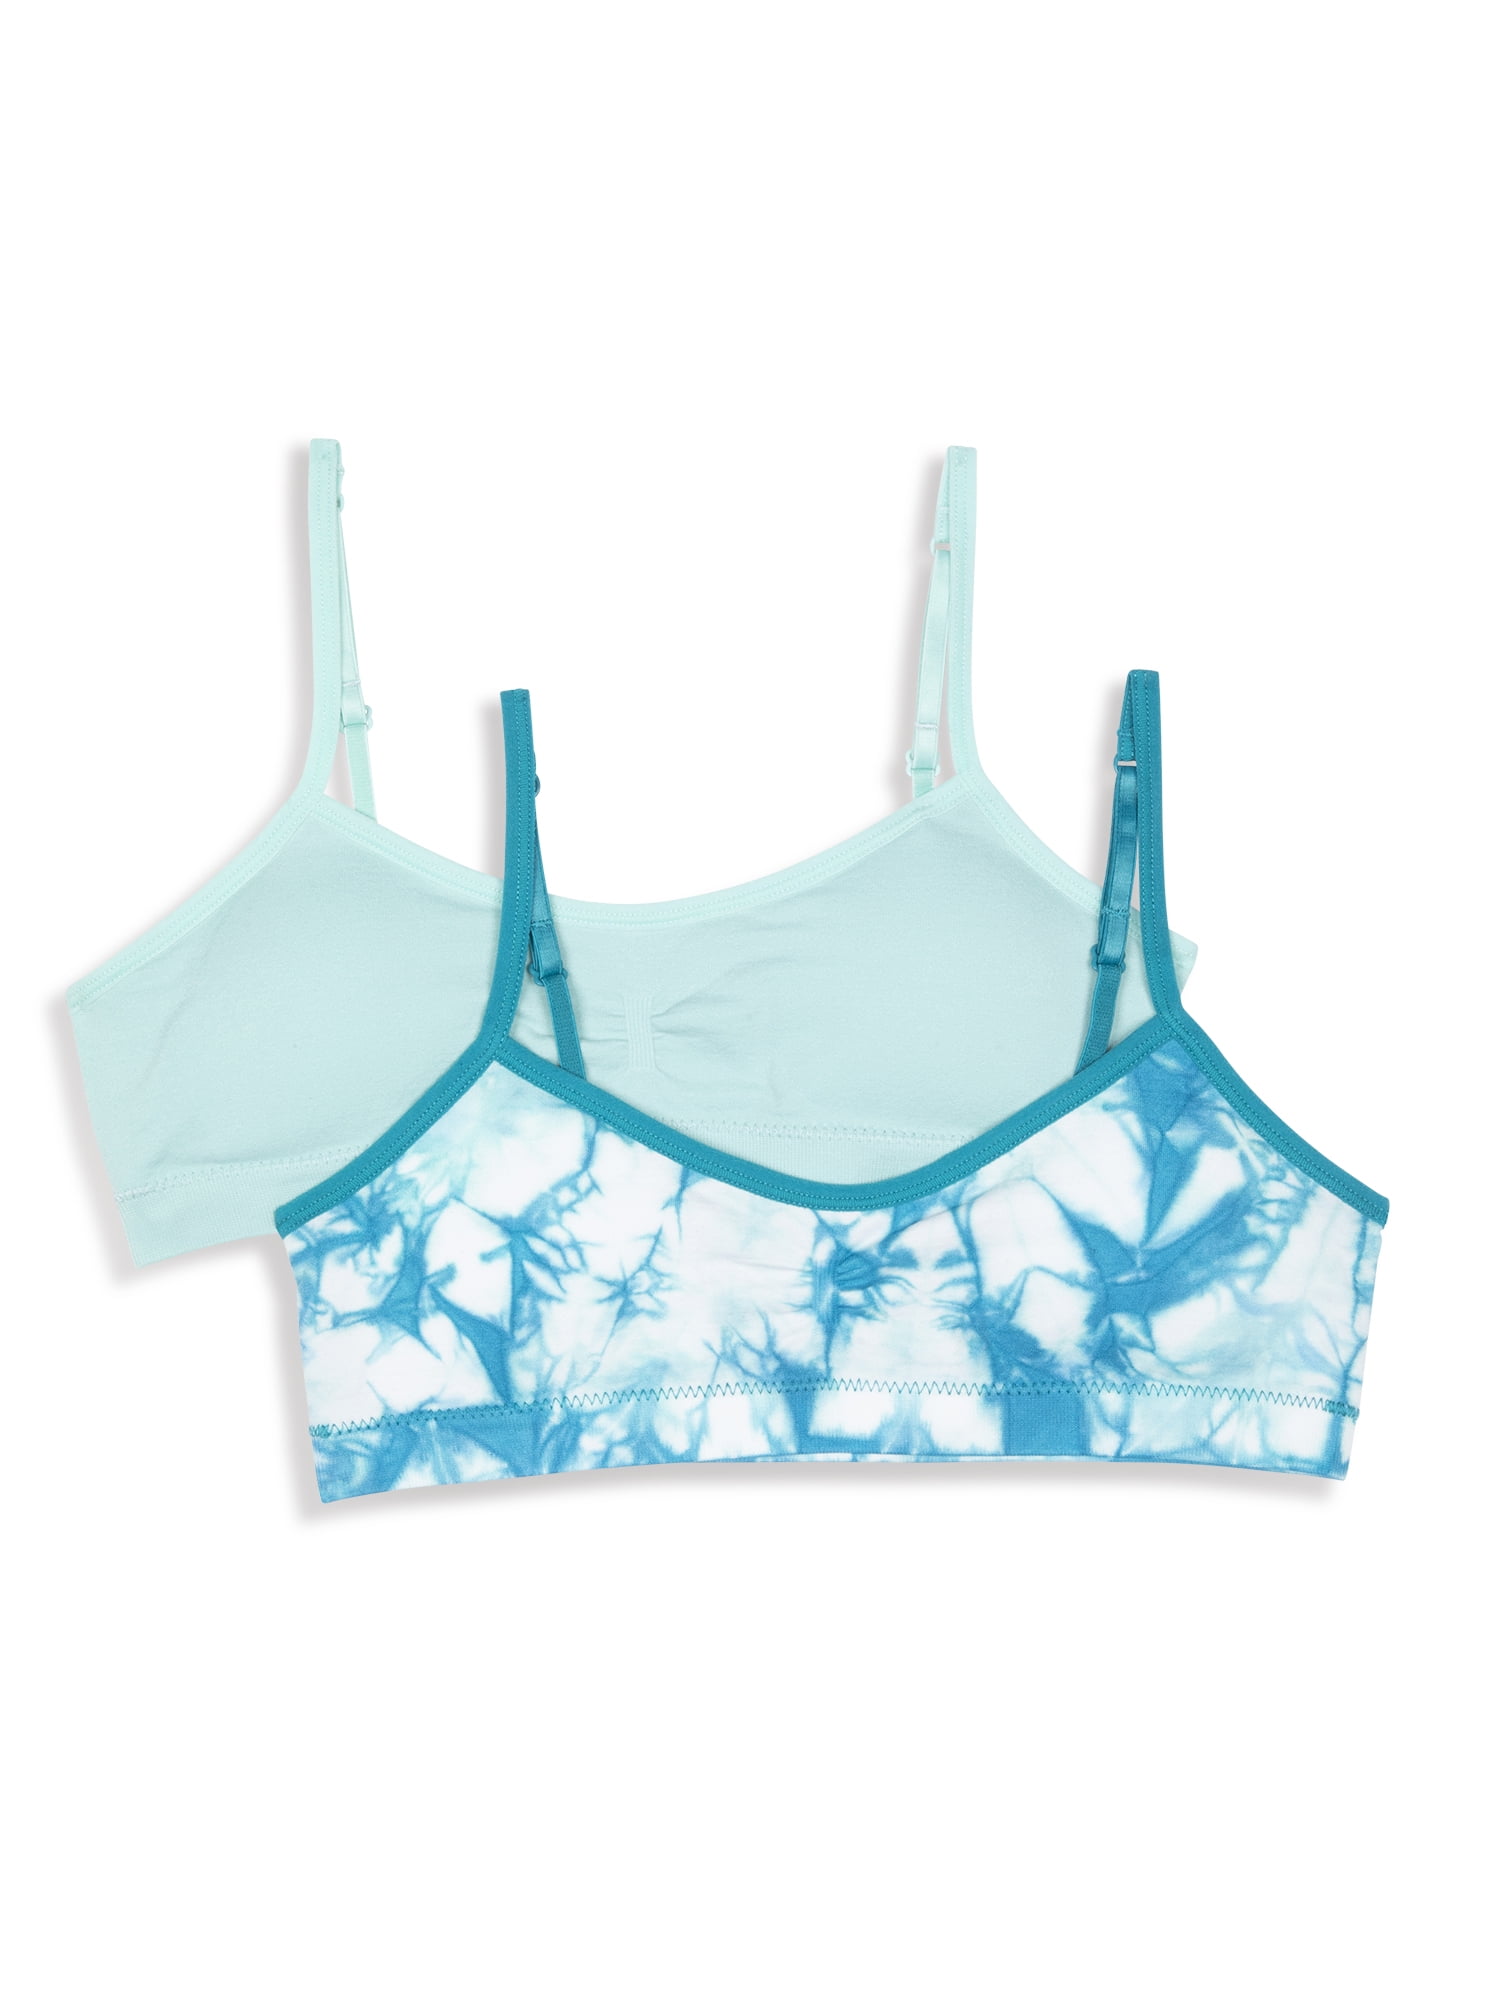 Girls Two Pack Hanes Bras, Size 34/L RN15763